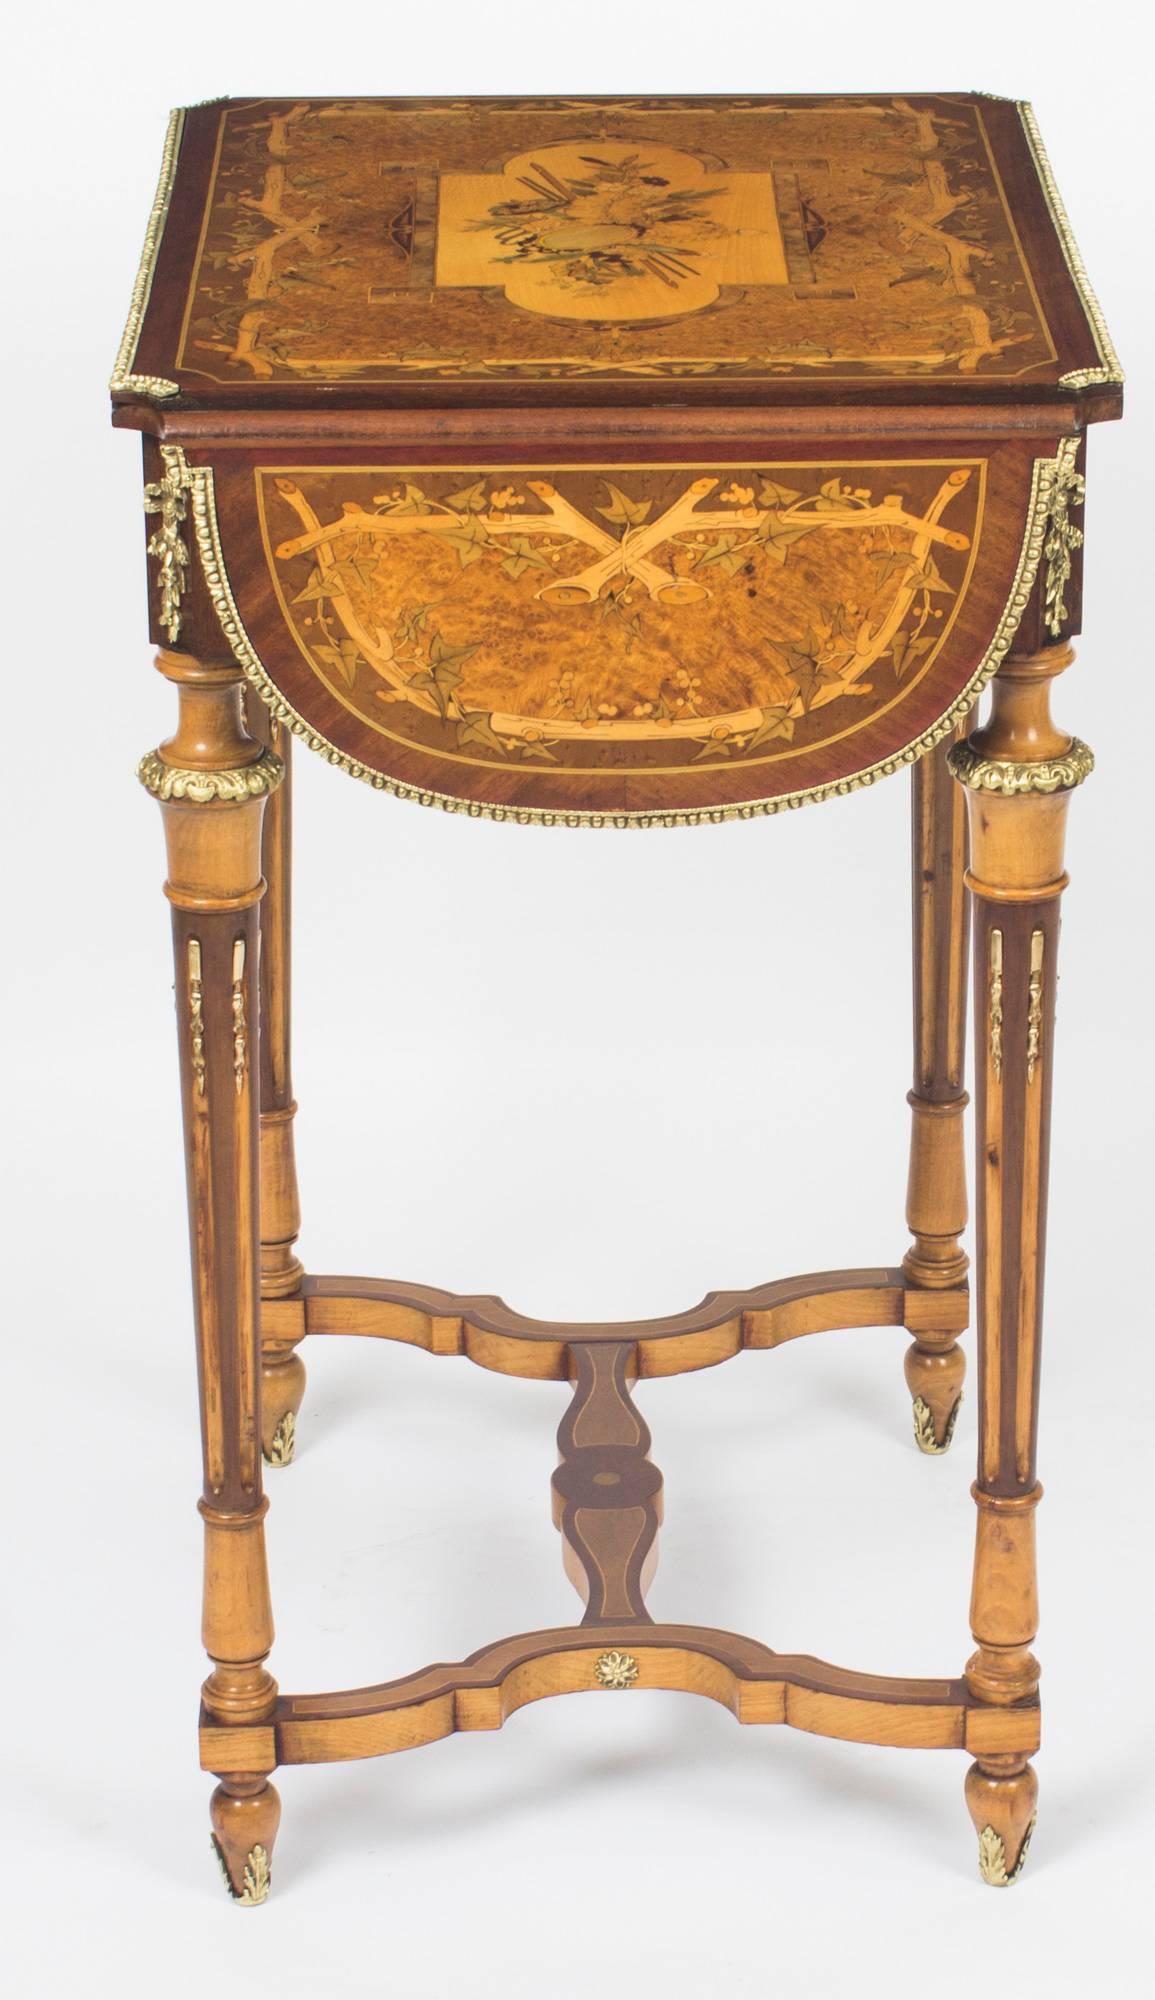 Antique French Napoleon III Revival Poudreuse Writing Table, 19th Century 2